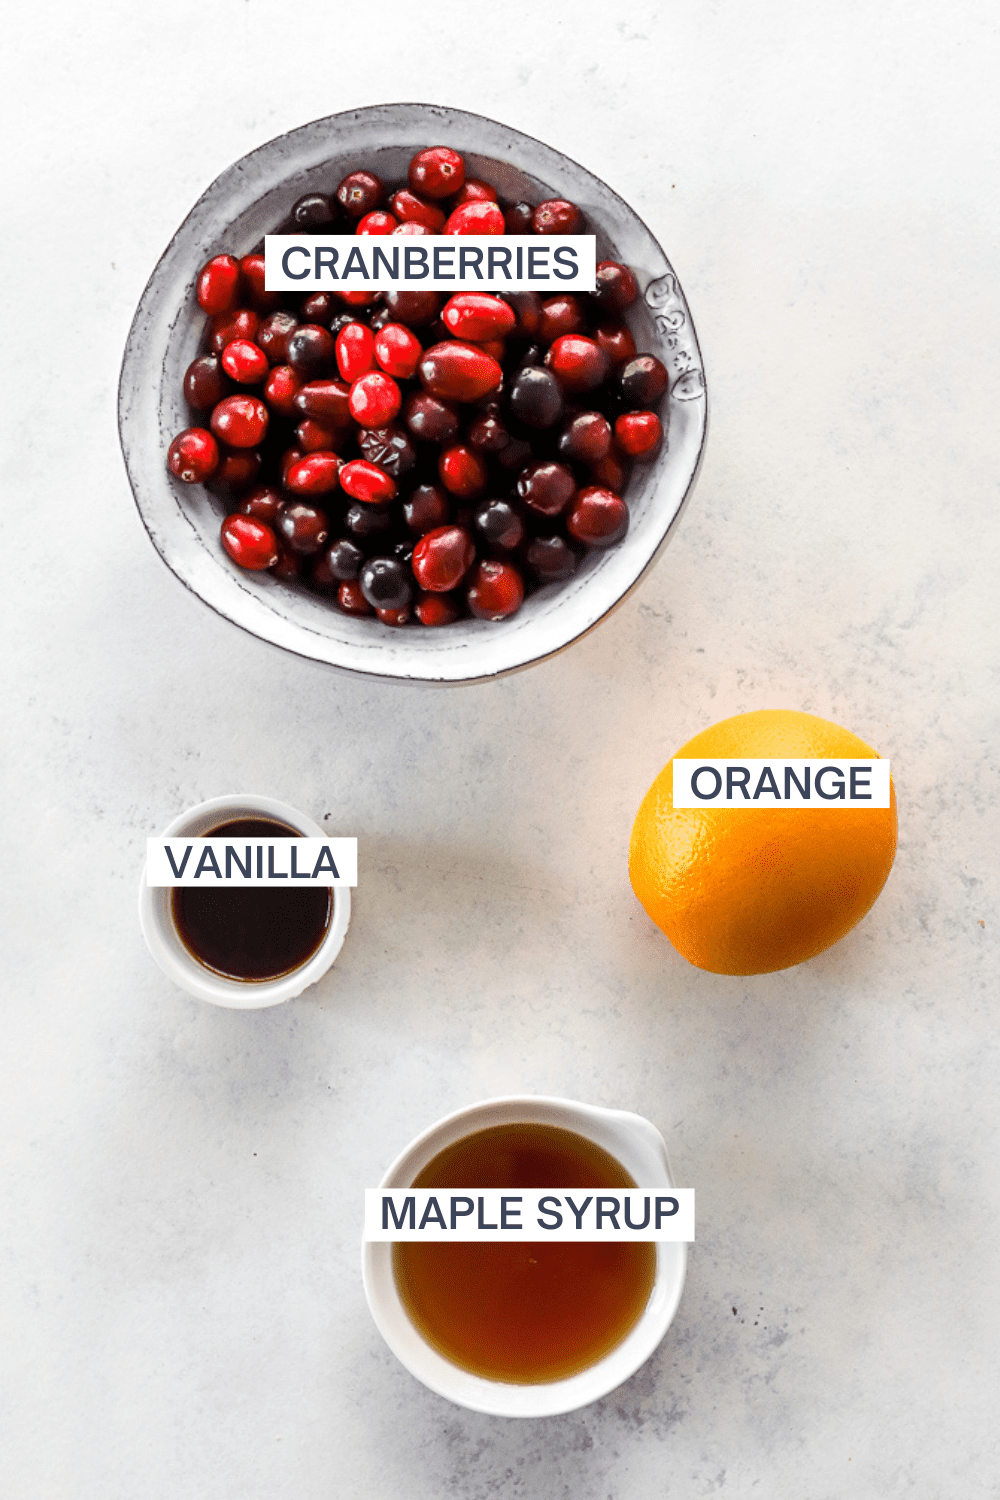 Ingredients for homemade cranberry sauce with orange with labels over each ingredient. 